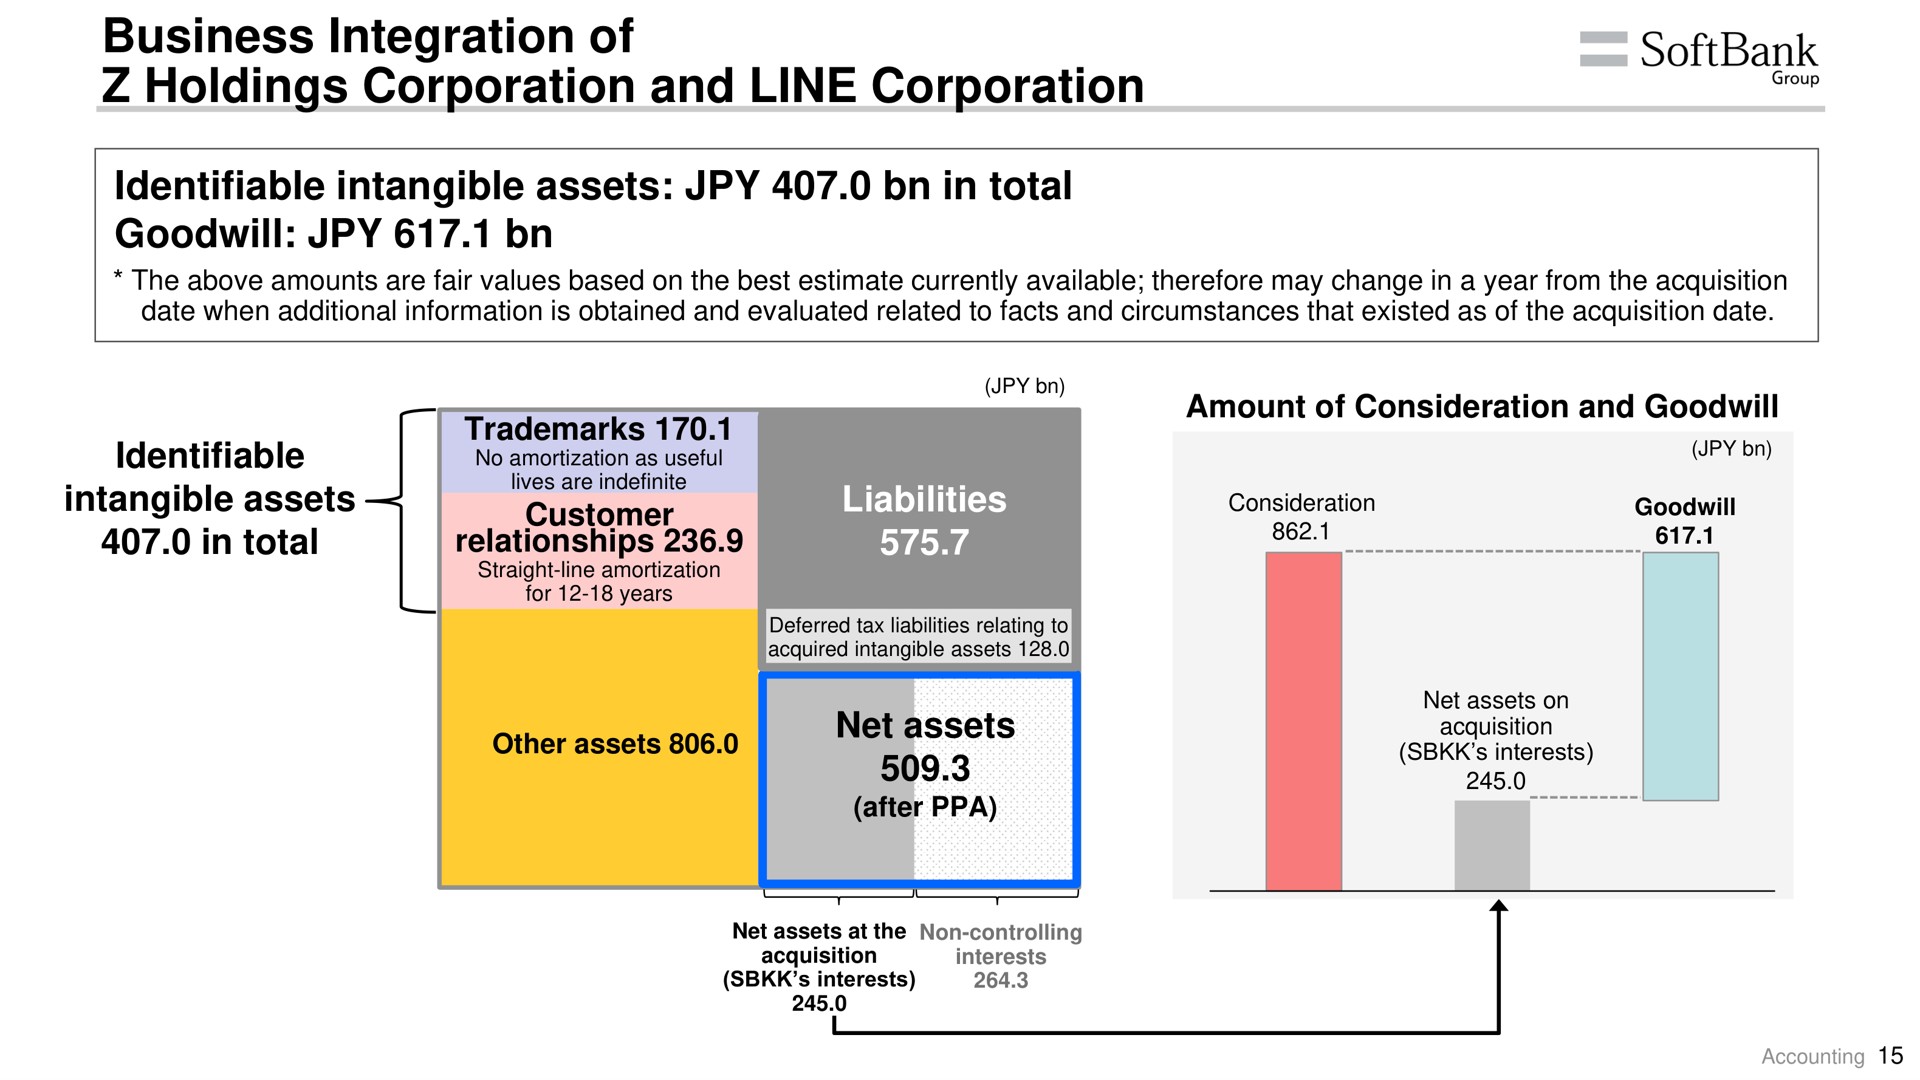 business integration of holdings corporation and line corporation identifiable intangible assets in total goodwill | SoftBank